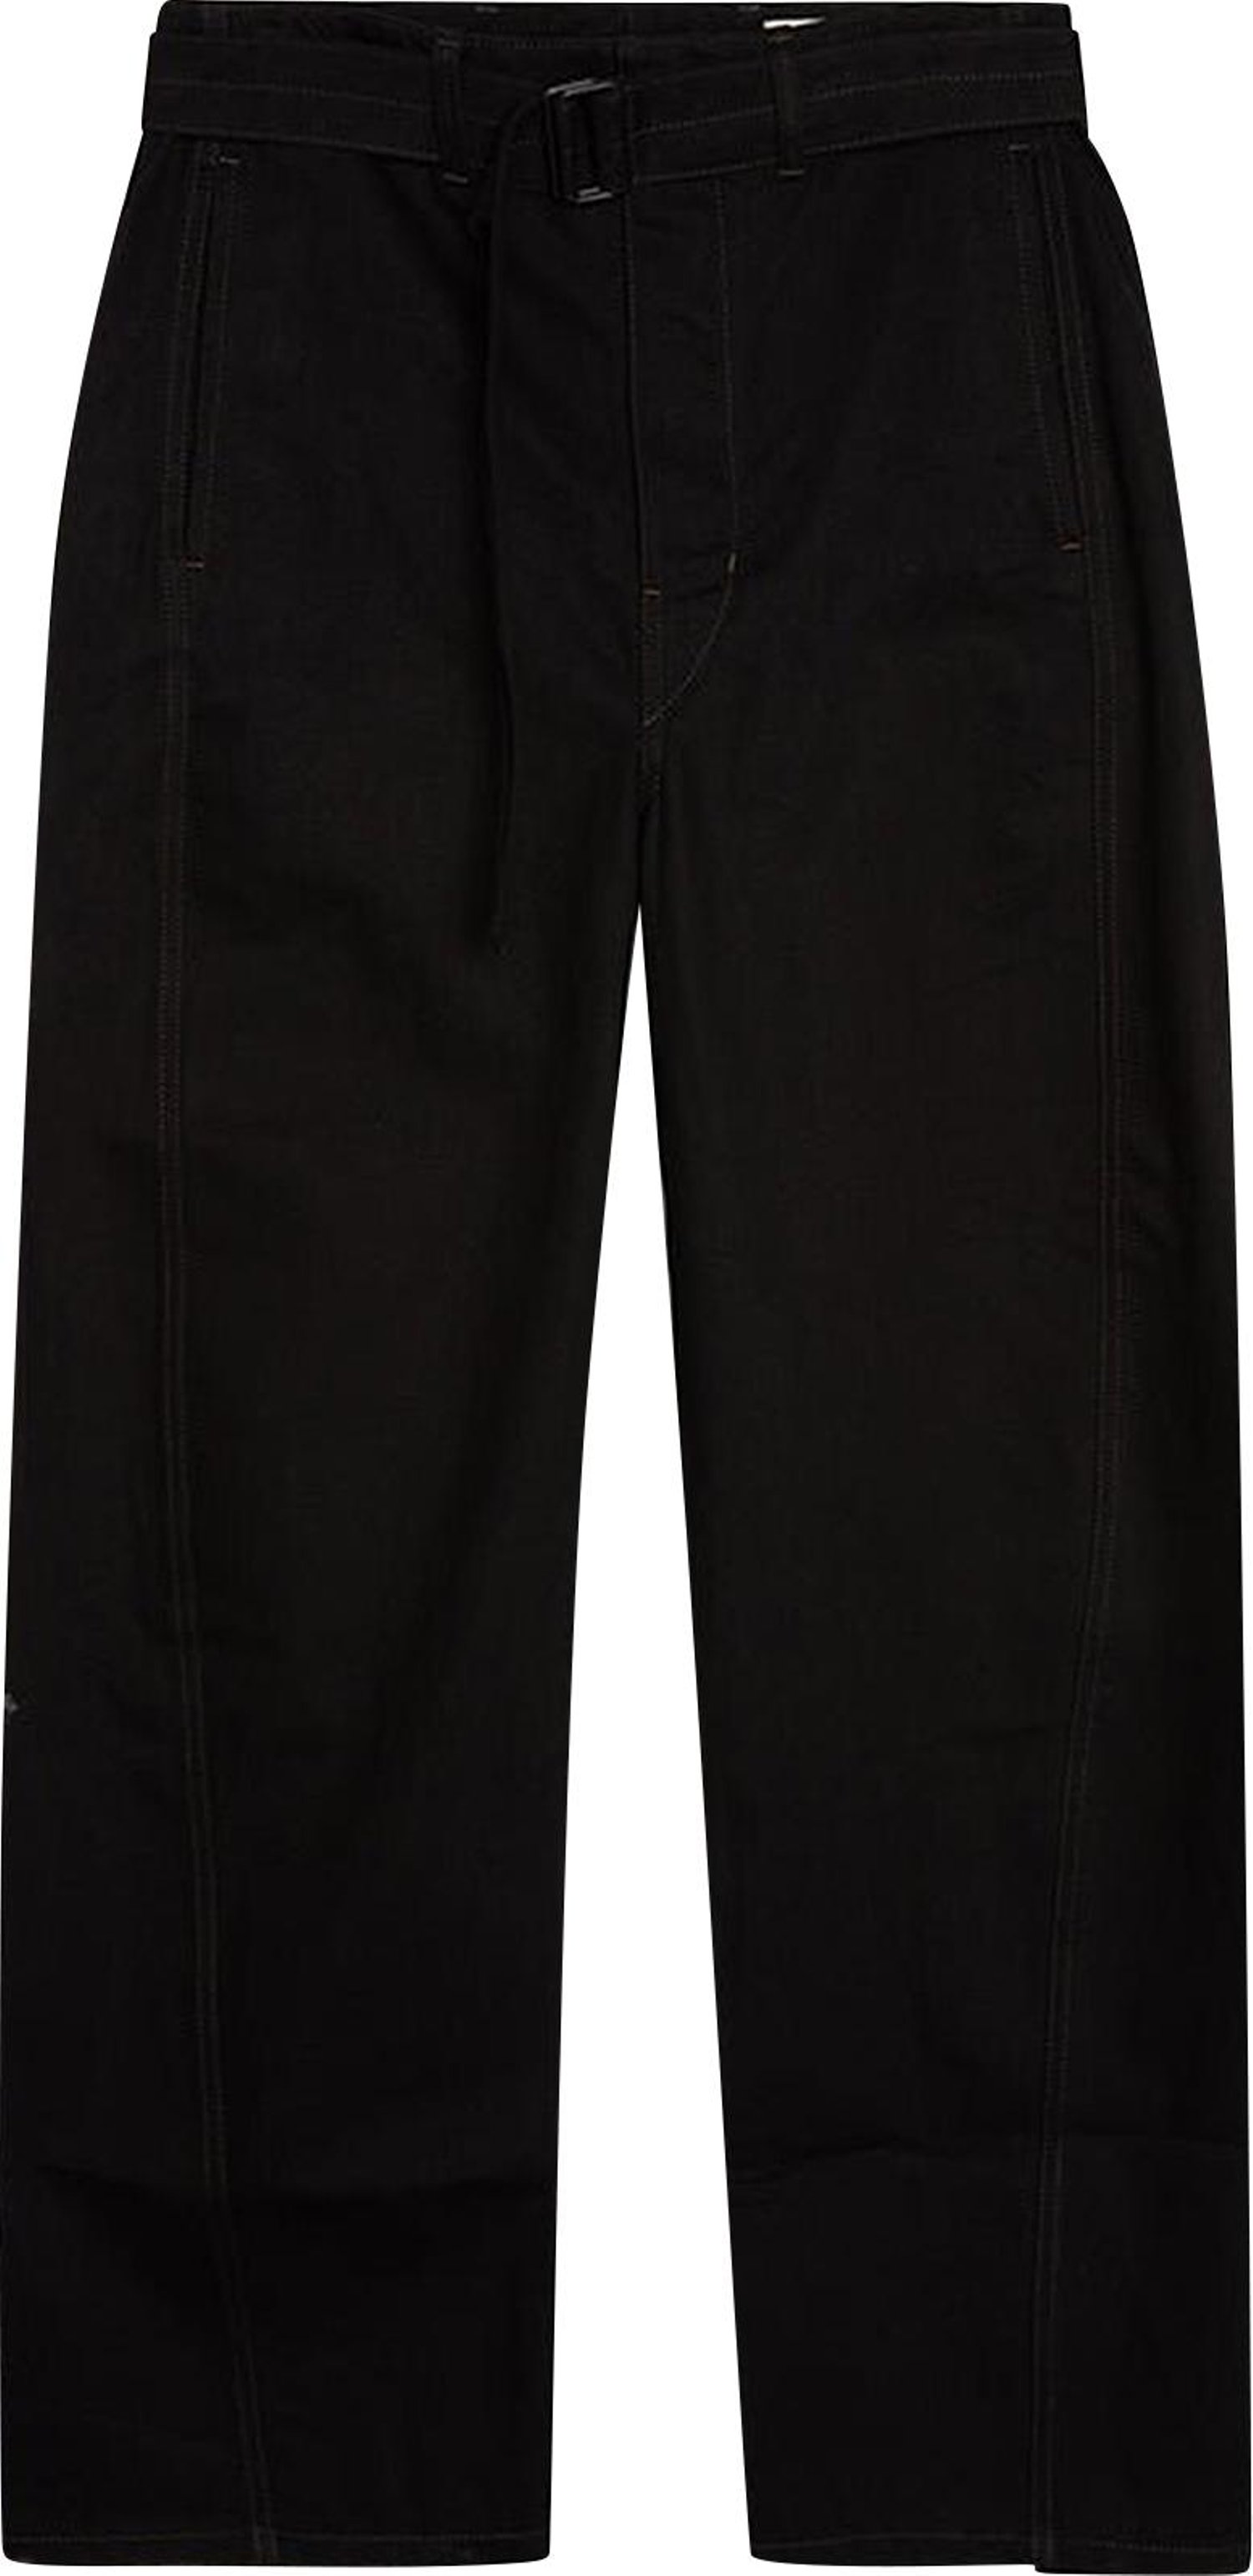 Buy Lemaire Twisted Belted Pants 'Black' - PA326 LD1000 999 | GOAT